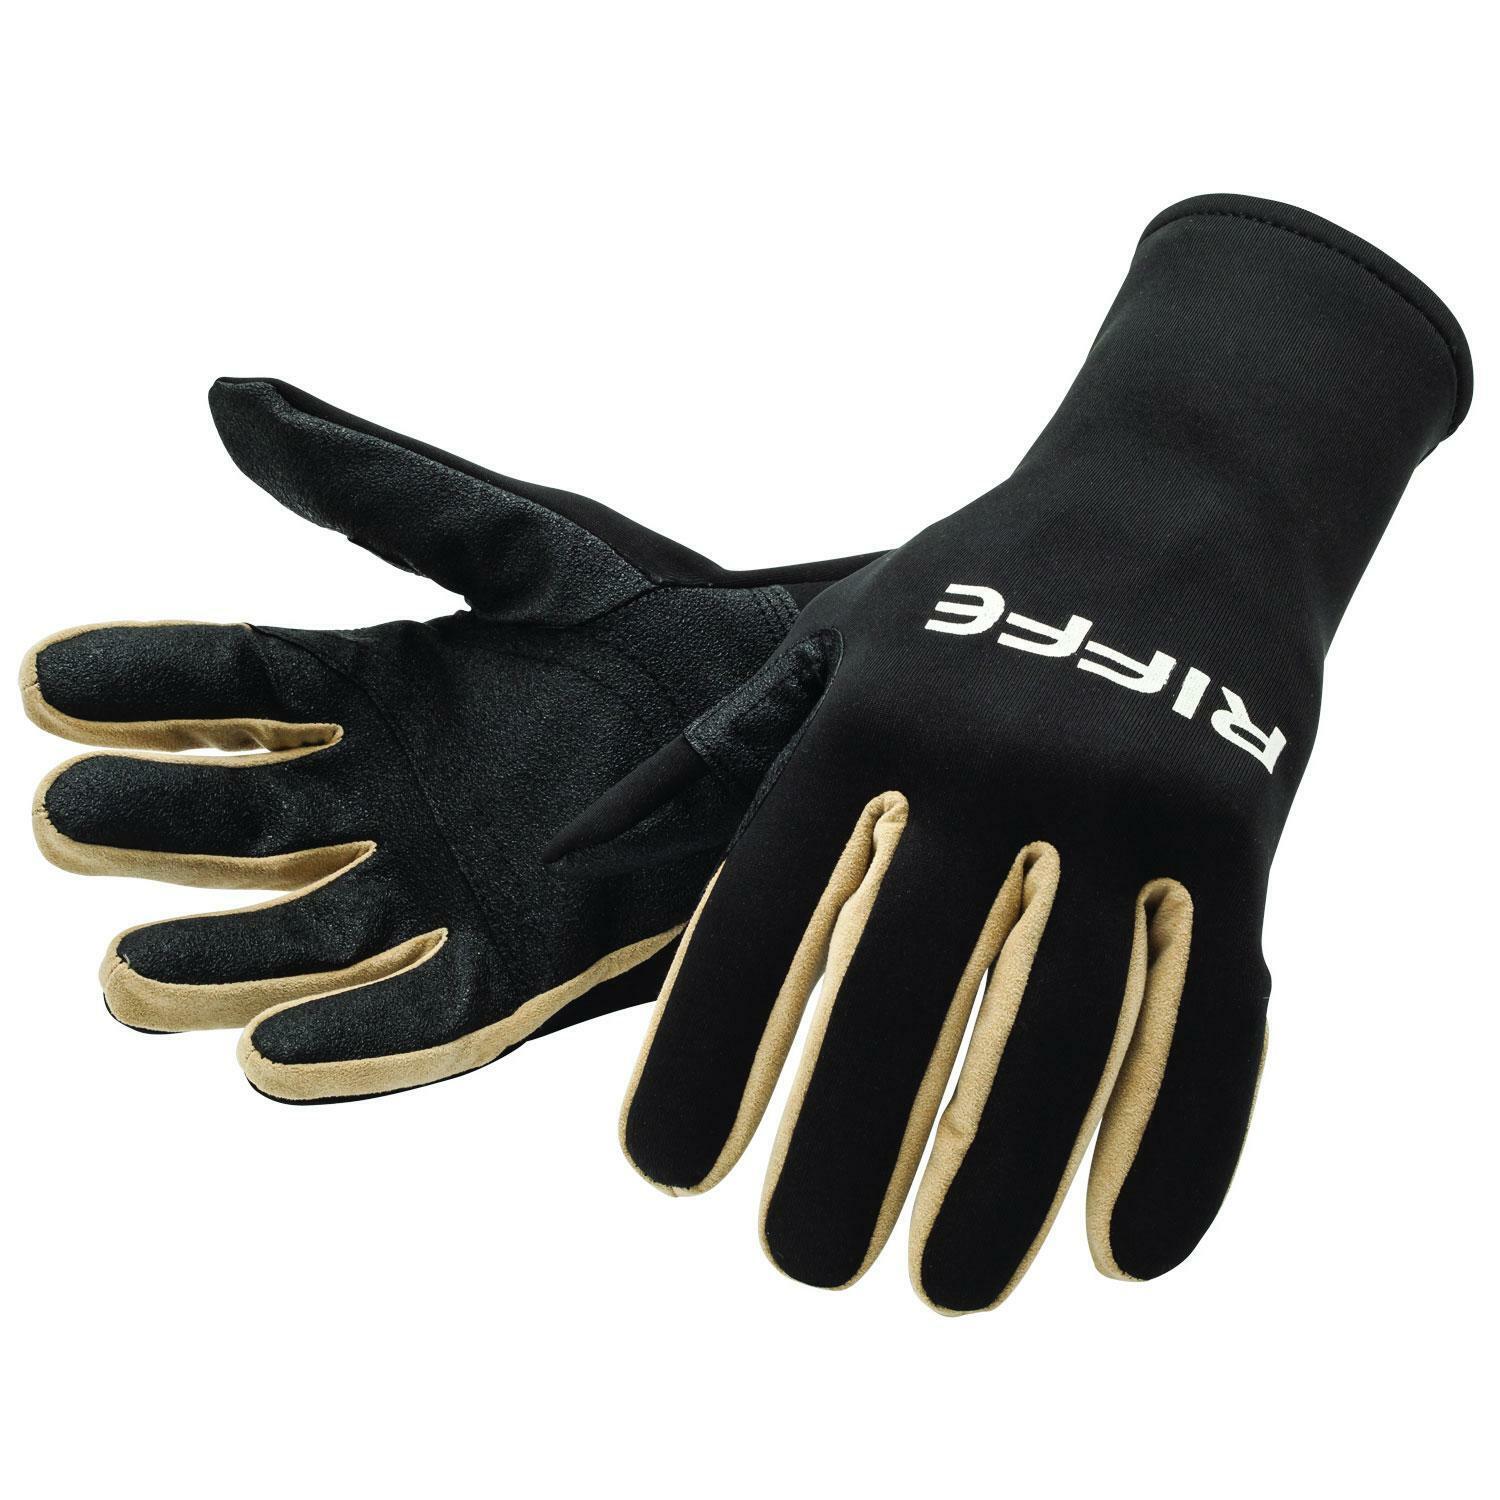 low-pricing $30 Riffe Superior Hunter Diving Spearfishing 2mm Gloves